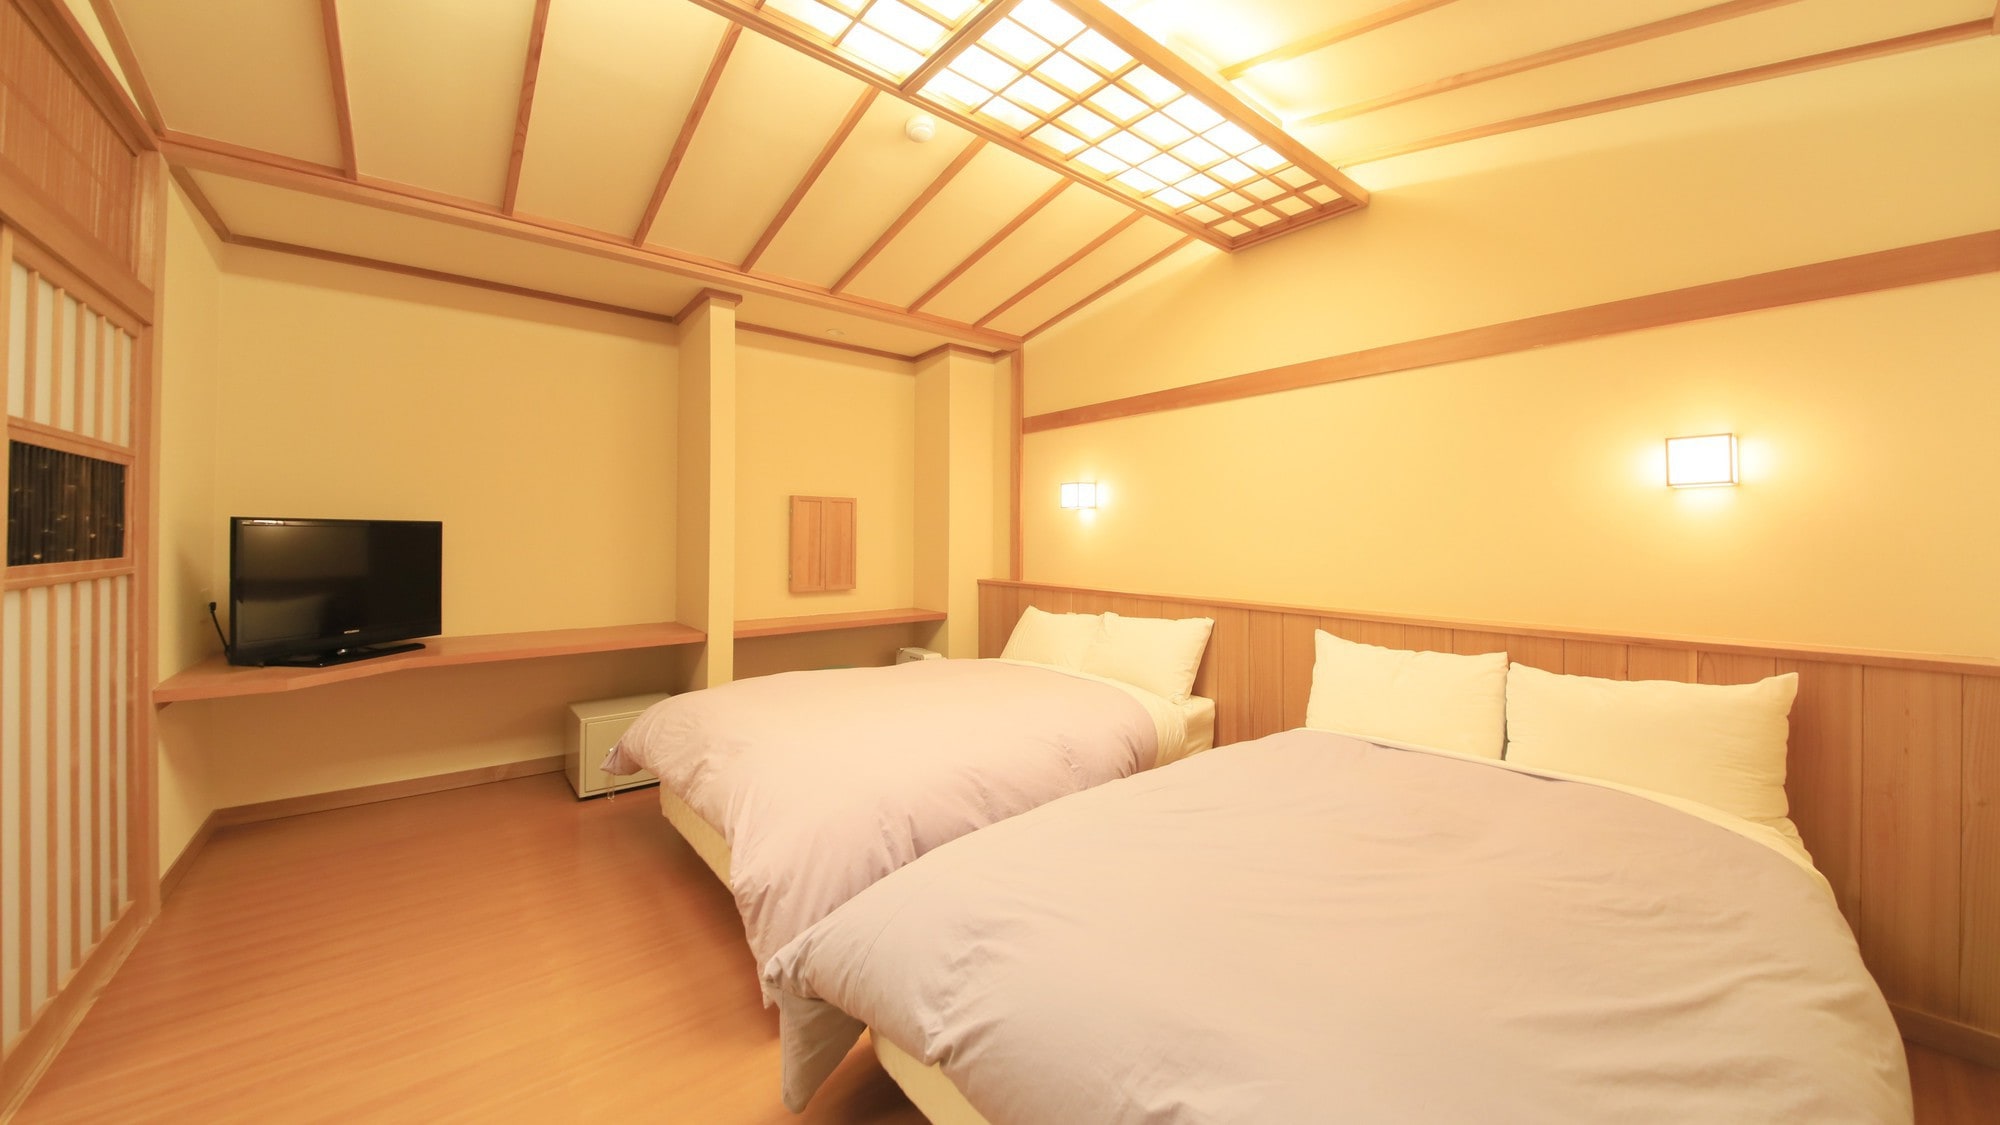 [Example of guest room] Special room & hellip; bedroom is fully equipped. We have prepared a bed that is particular about sleeping comfort.